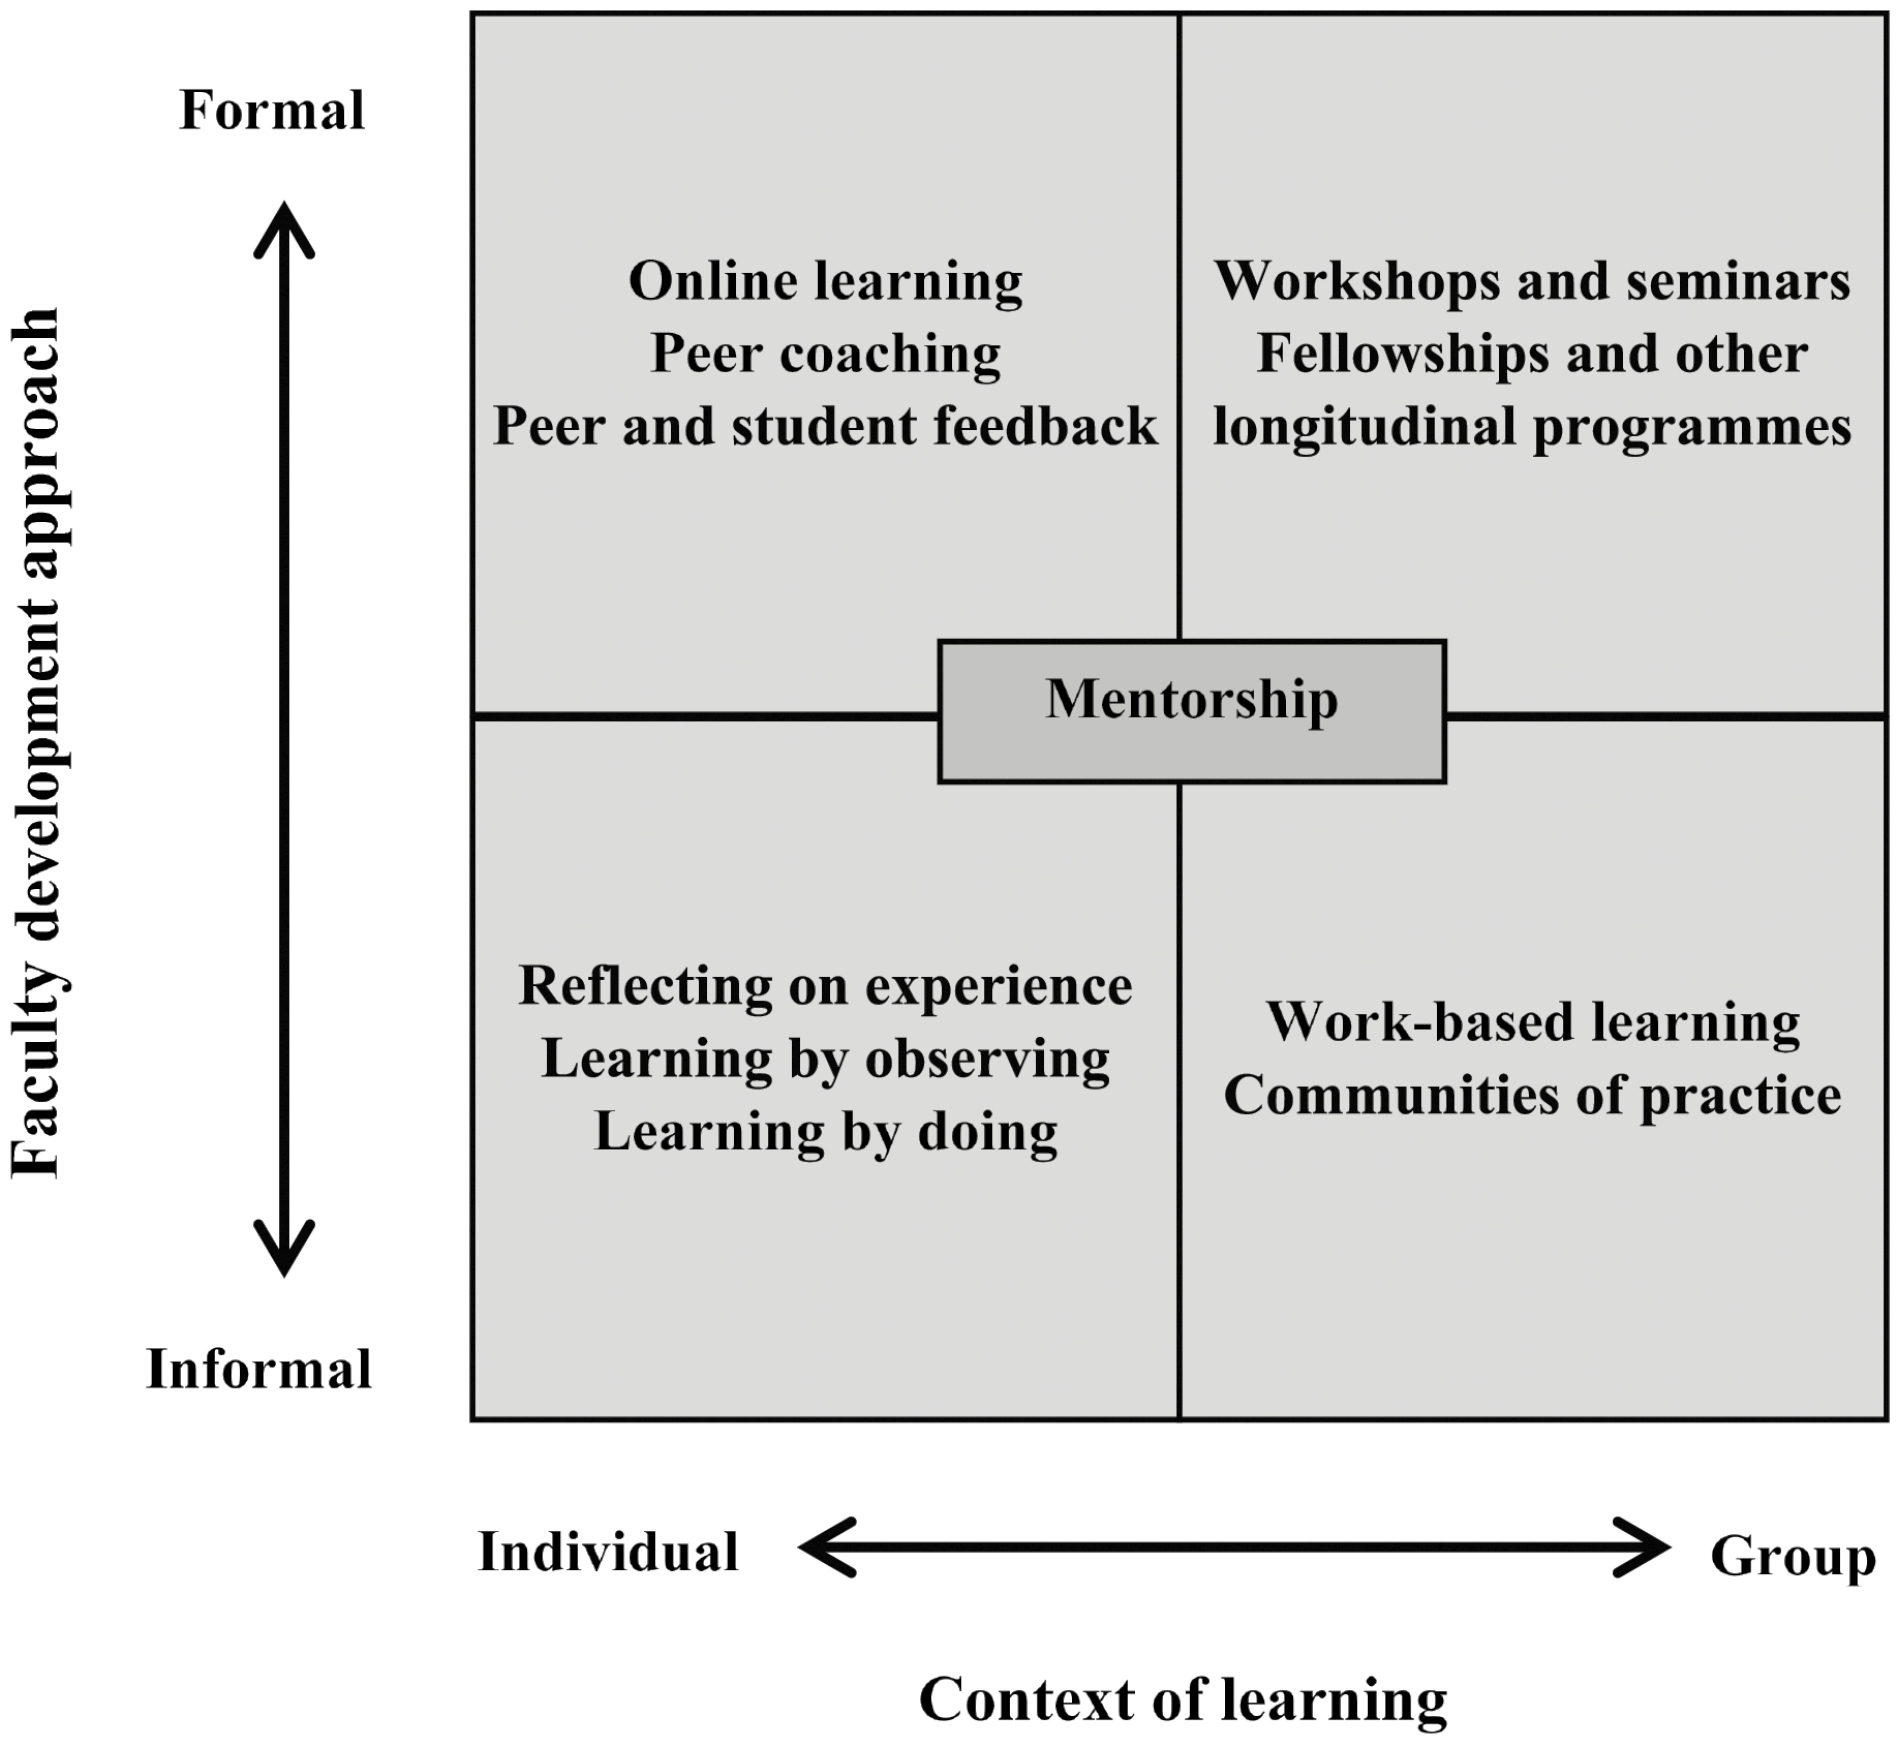 The organizing conceptual framework for this review is Steinert’s (2010) mapping of faculty development activities, from workshops to communities of practice.